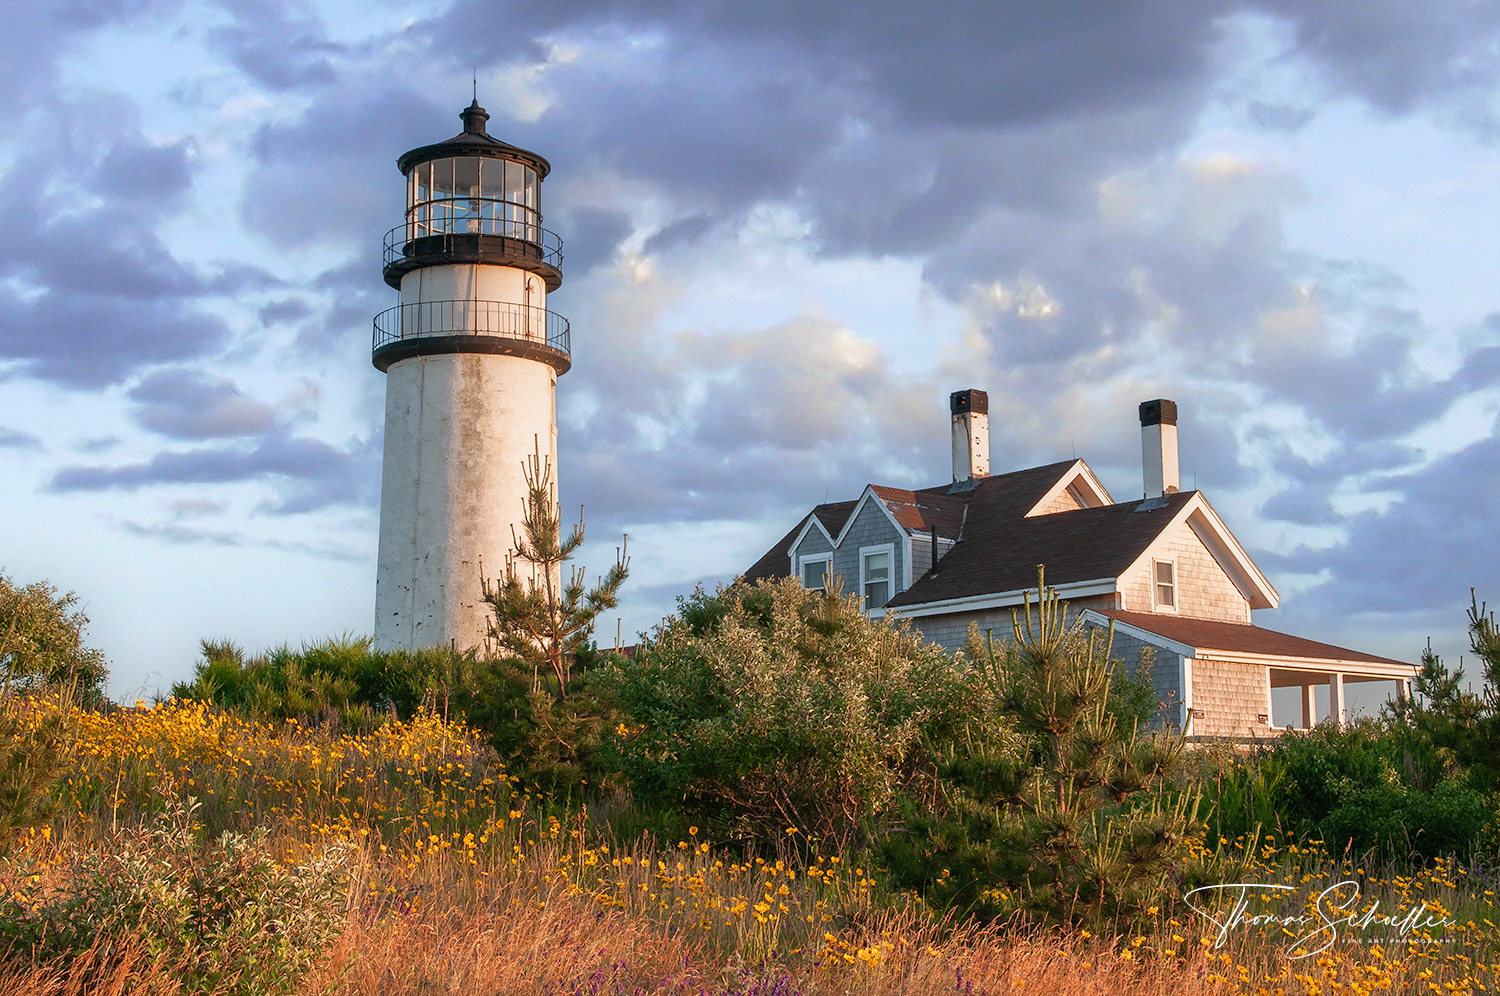 The Beautiful Cape Cod Lighthouse of Truro Massachusetts | Fine Art Photography Prints For Sale